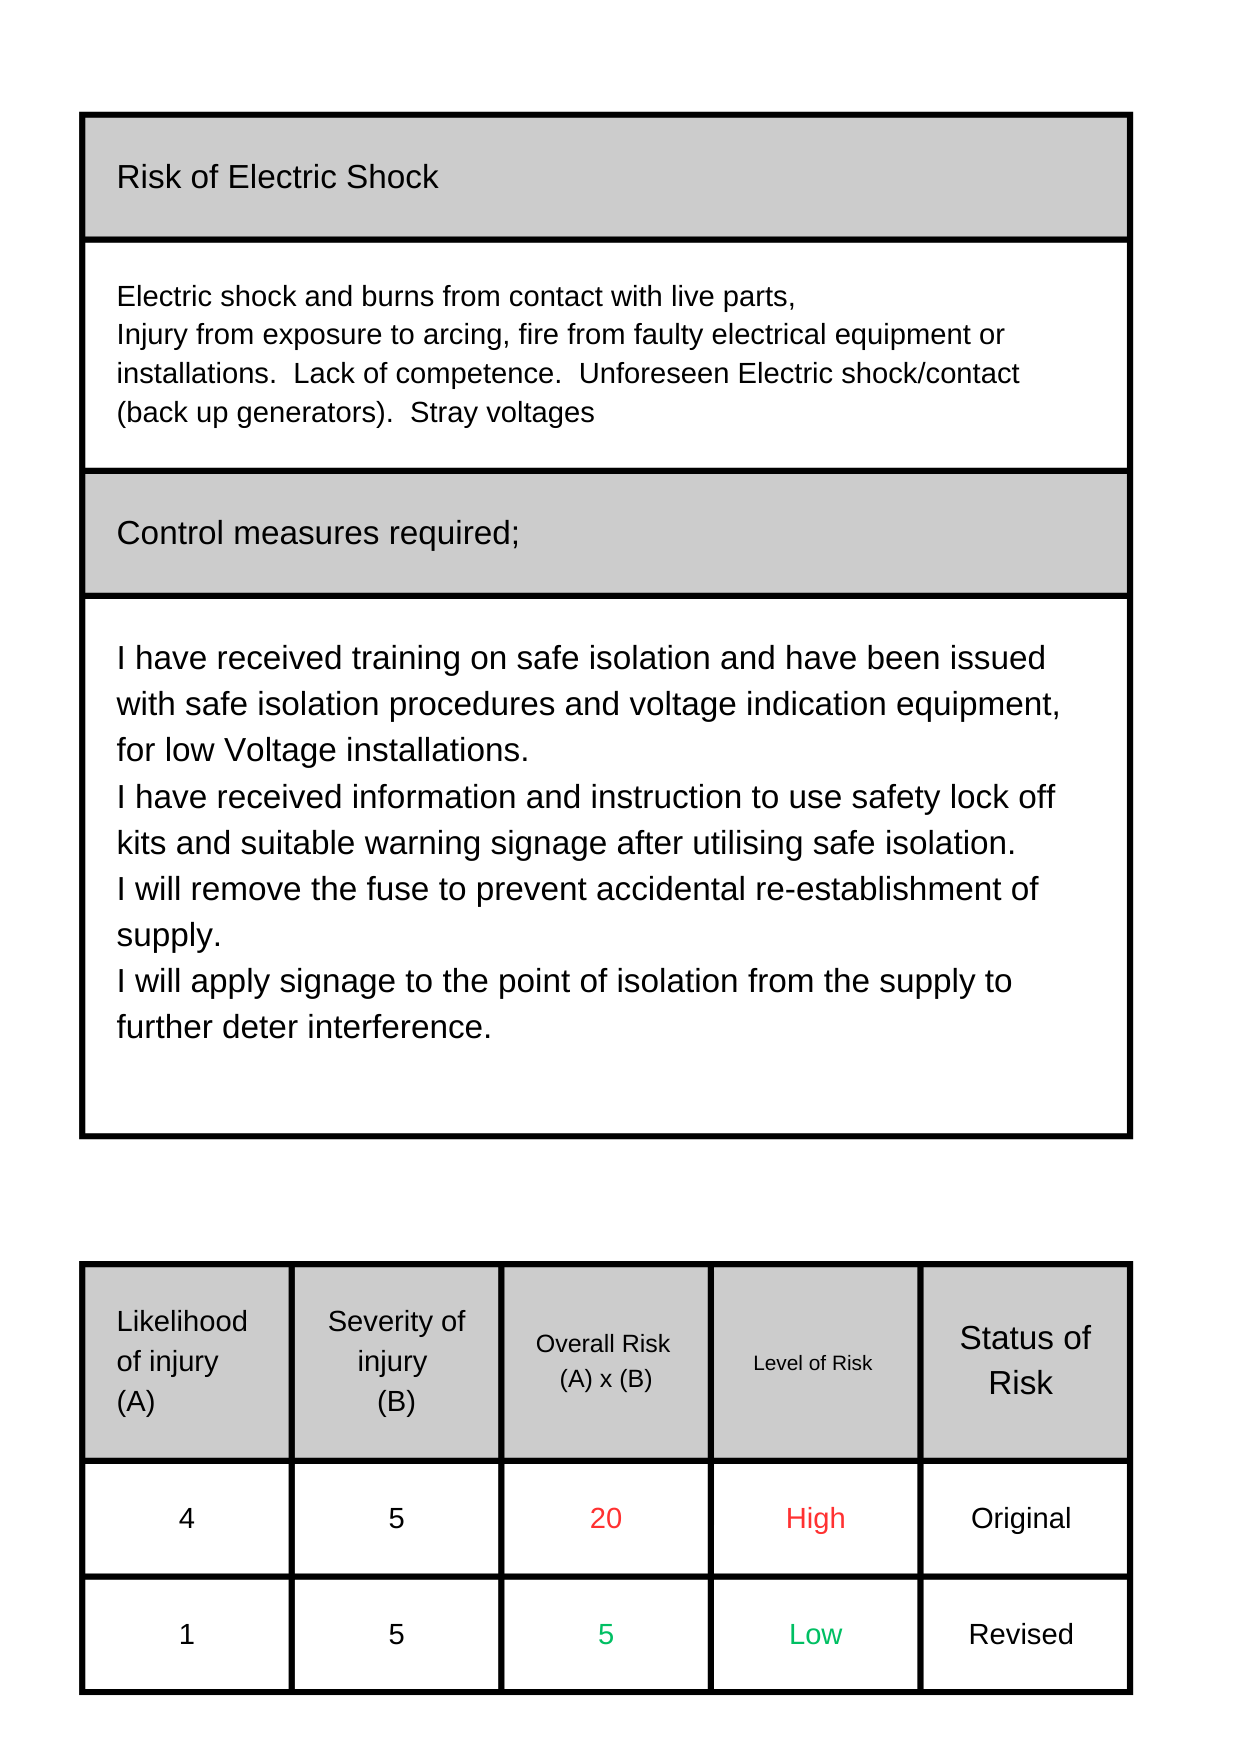 Hazards from general site conditions (7).png